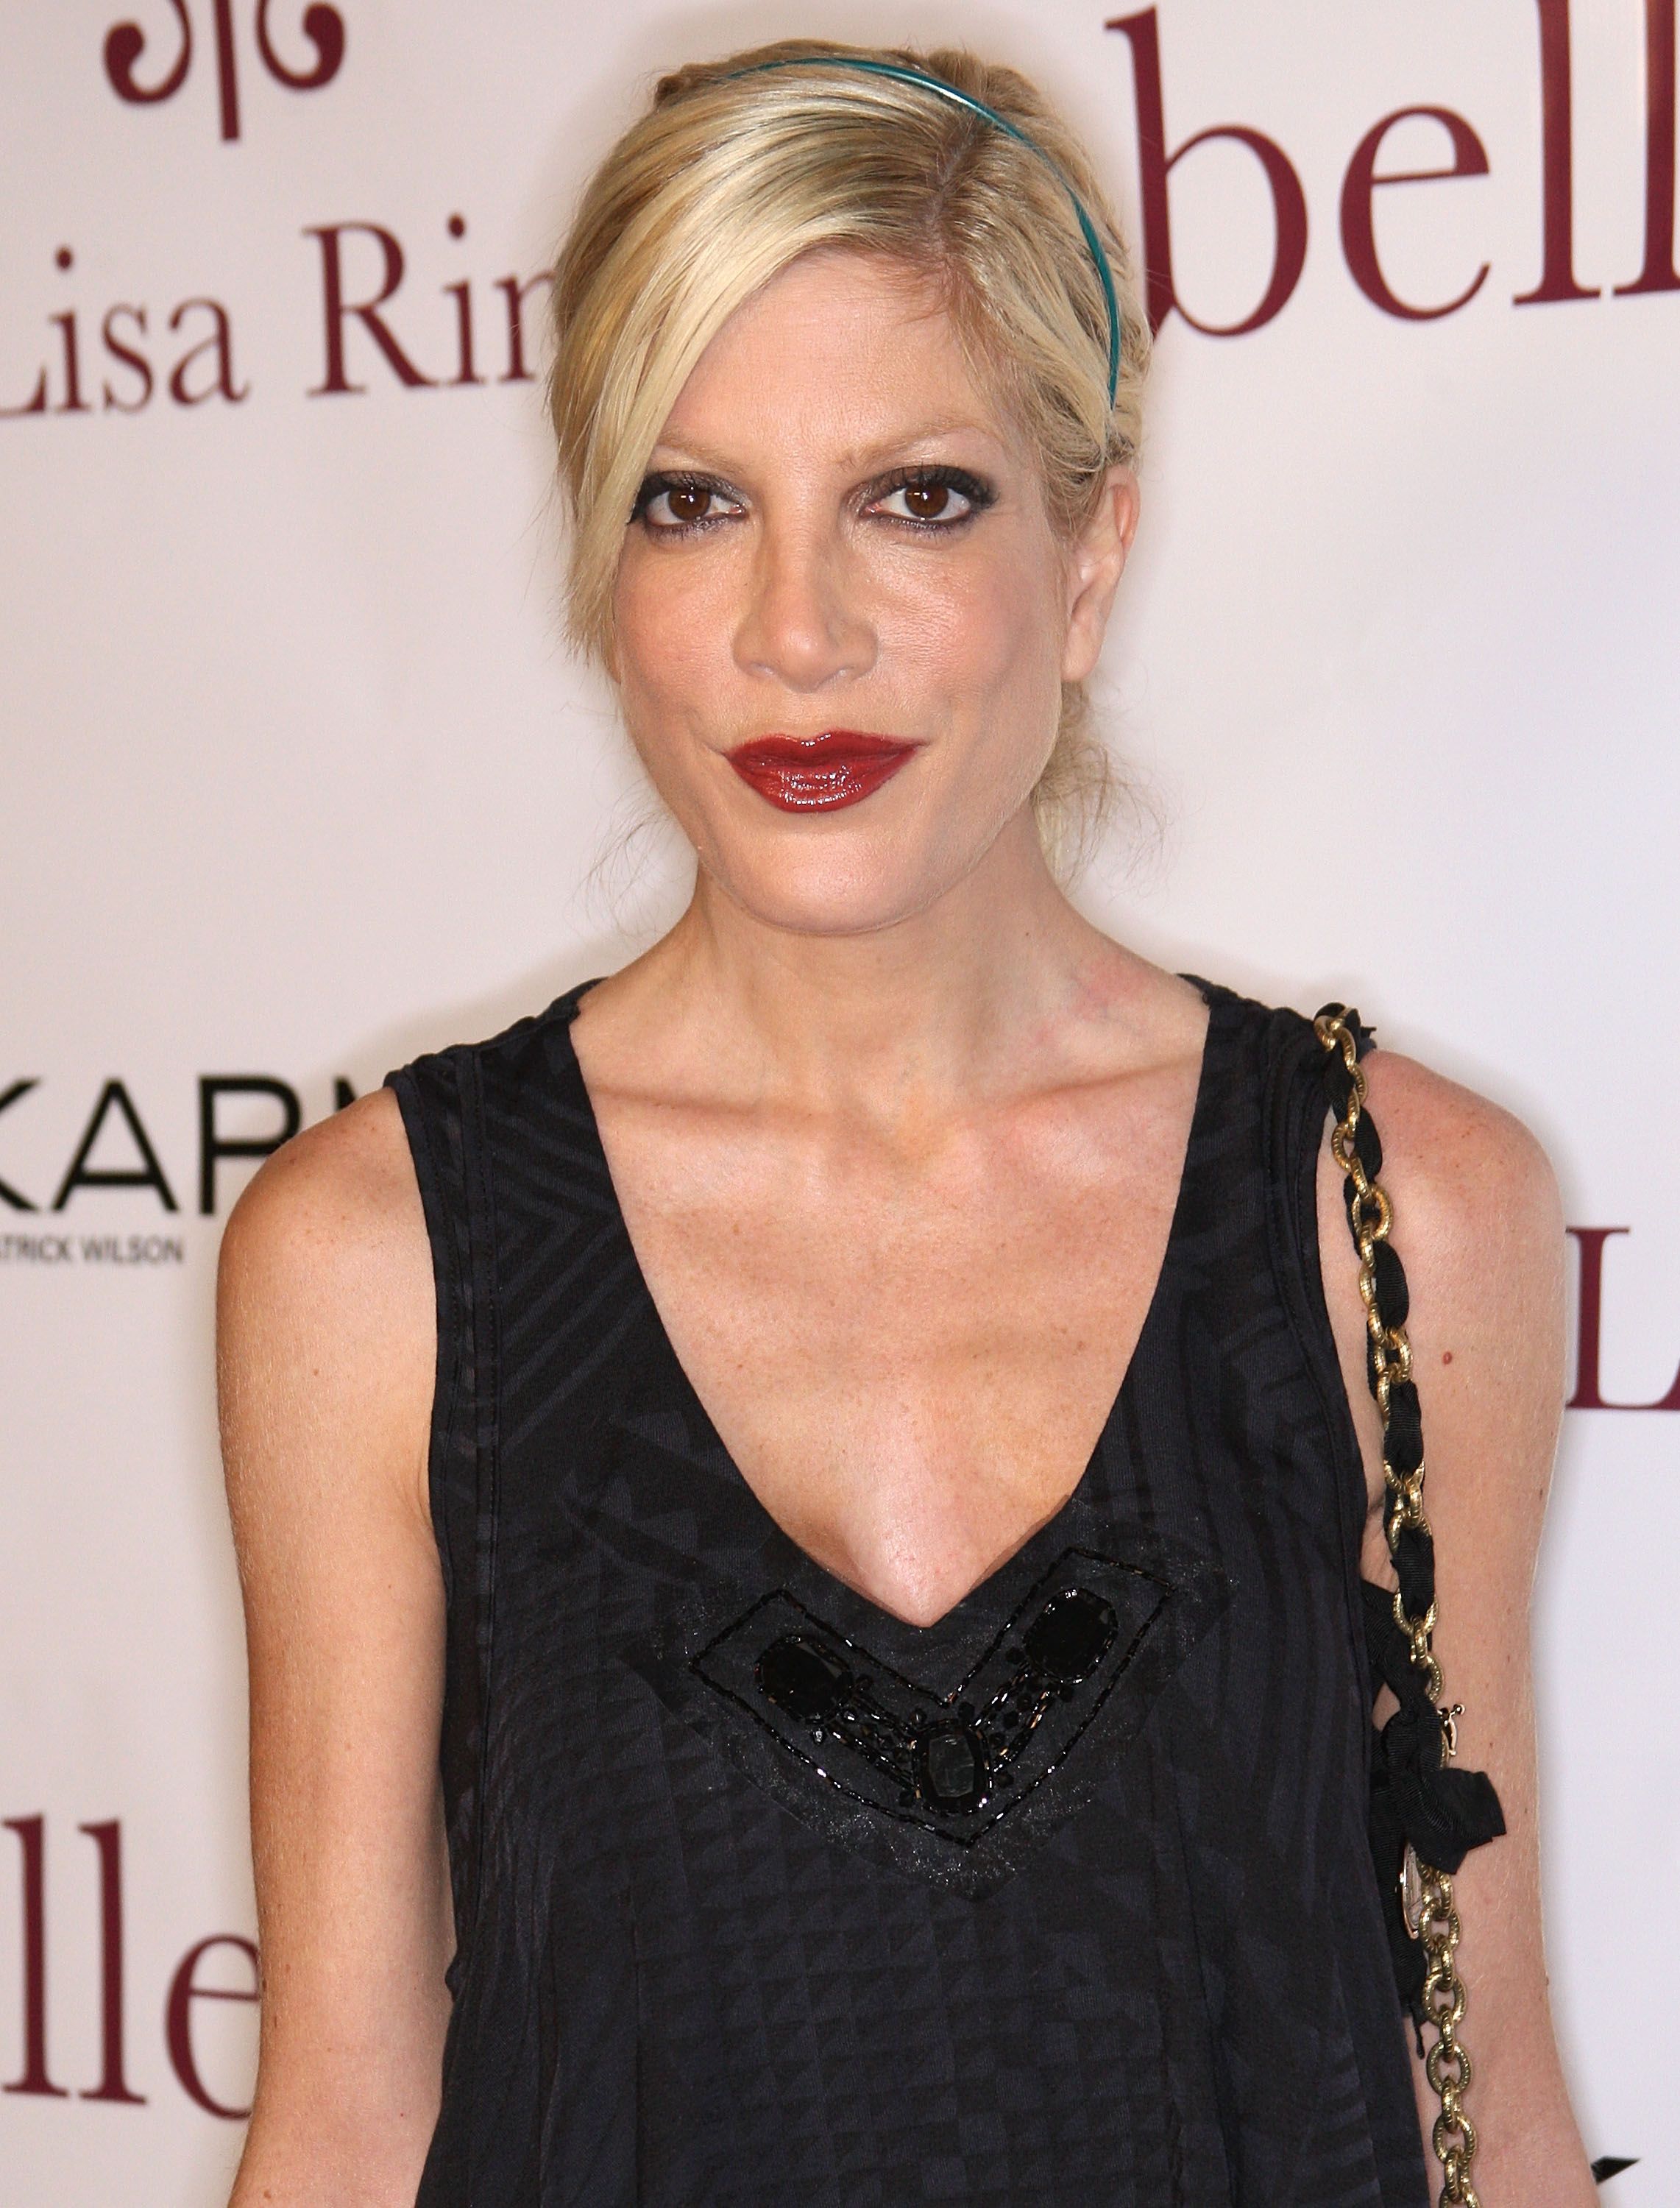 Actress Tori Spelling at the seventh anniversary of the Belle Gray Boutique on February 12, 2010 in Los Angeles, California | Photo: Getty Images